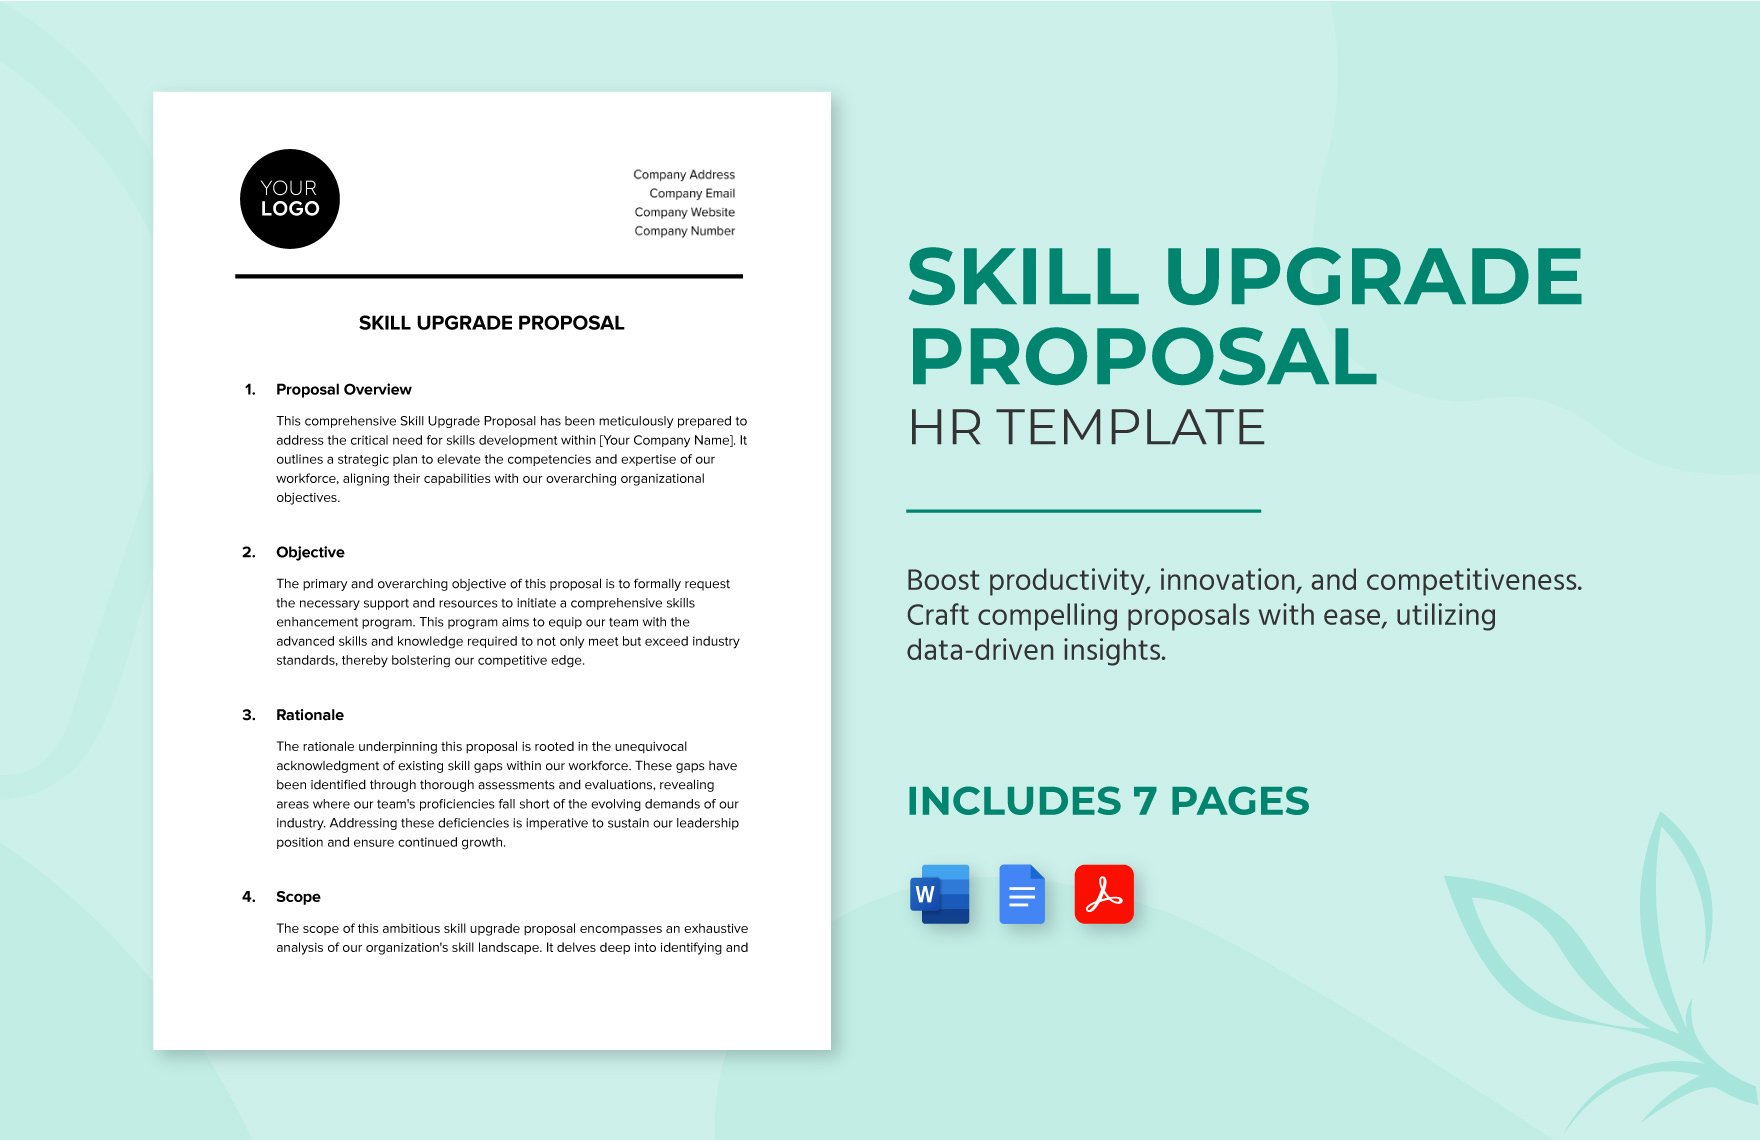 Skill Upgrade Proposal HR Template in Word, Google Docs, PDF